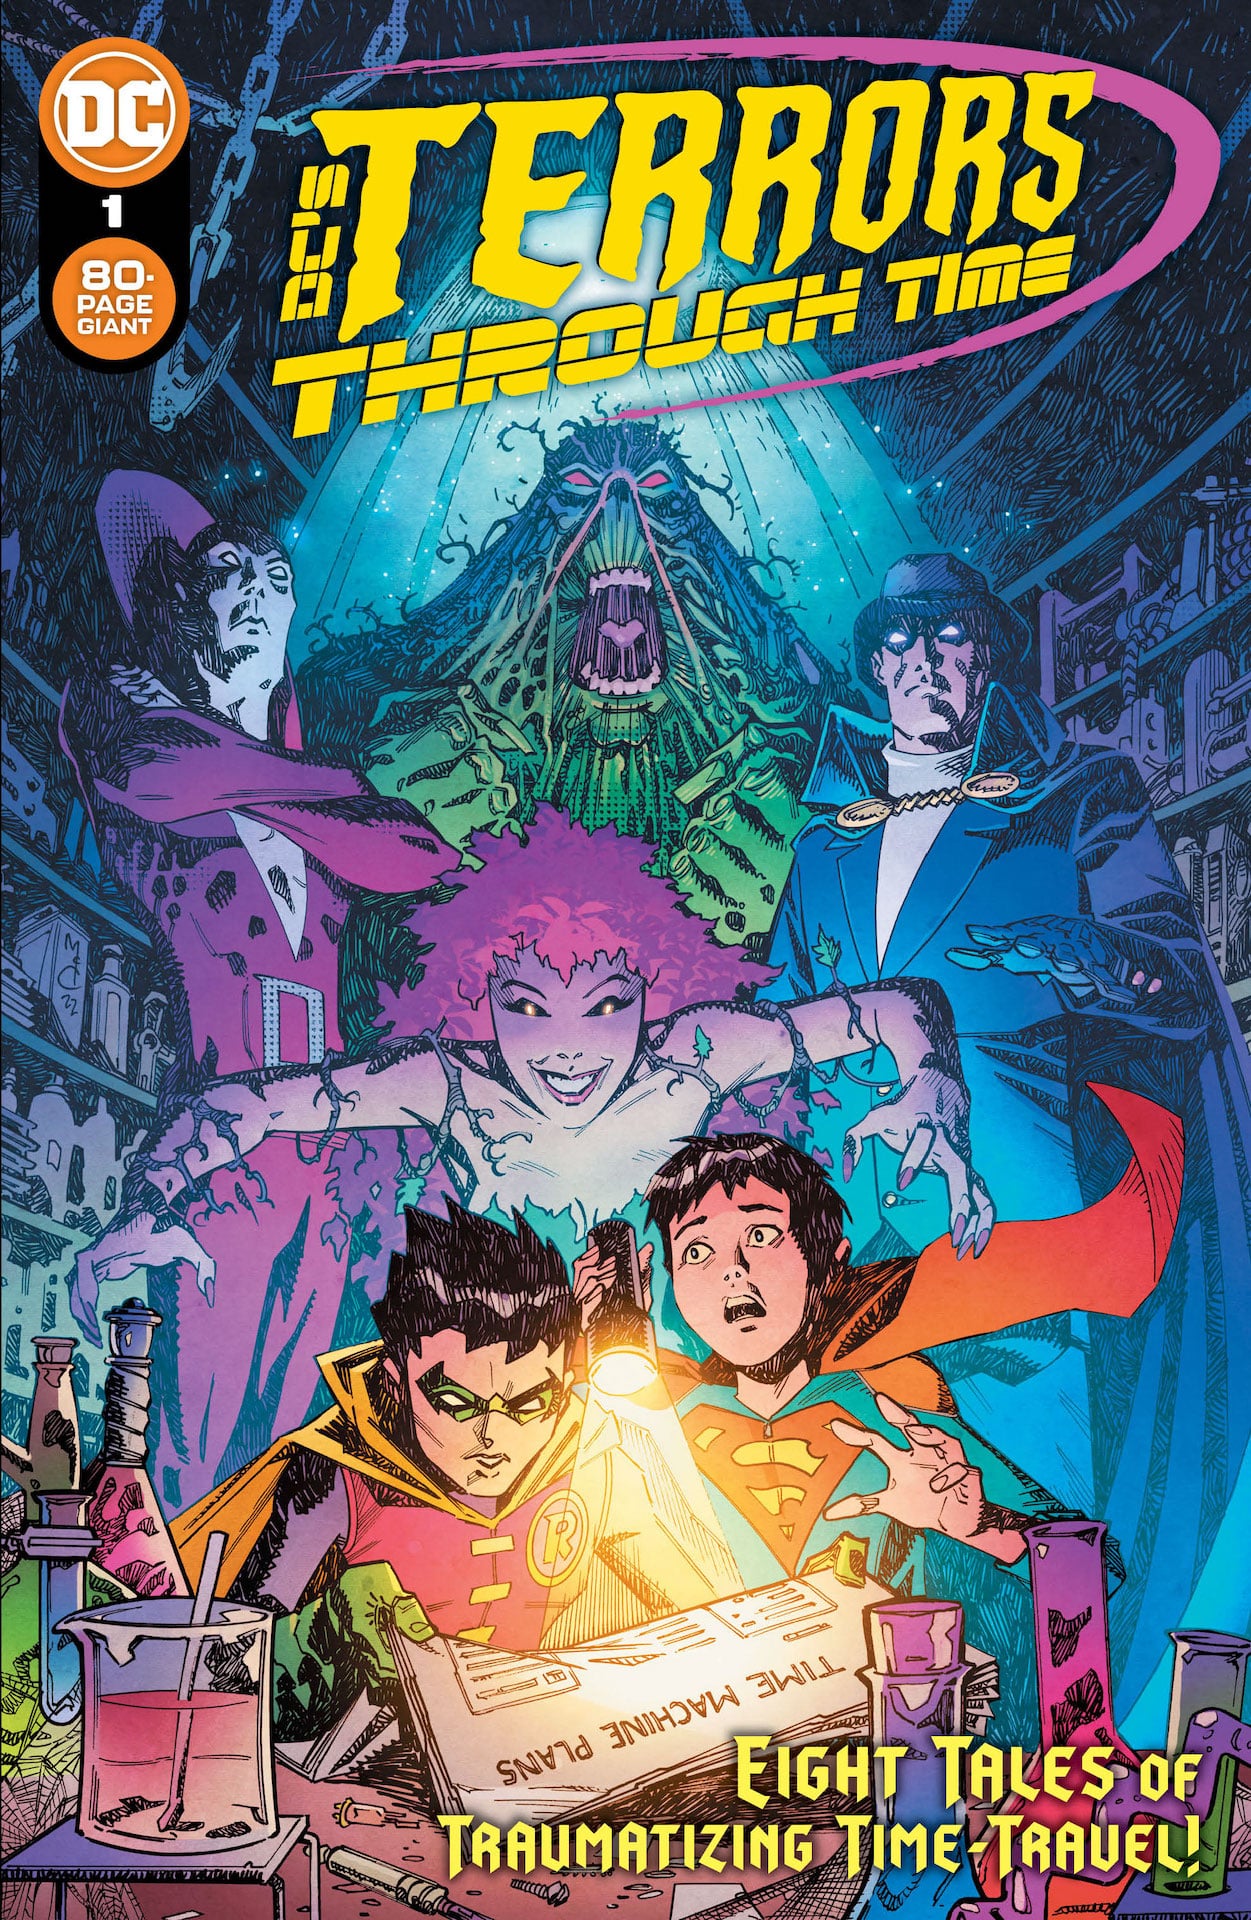 DC Preview: DC's Terrors Through Time #1